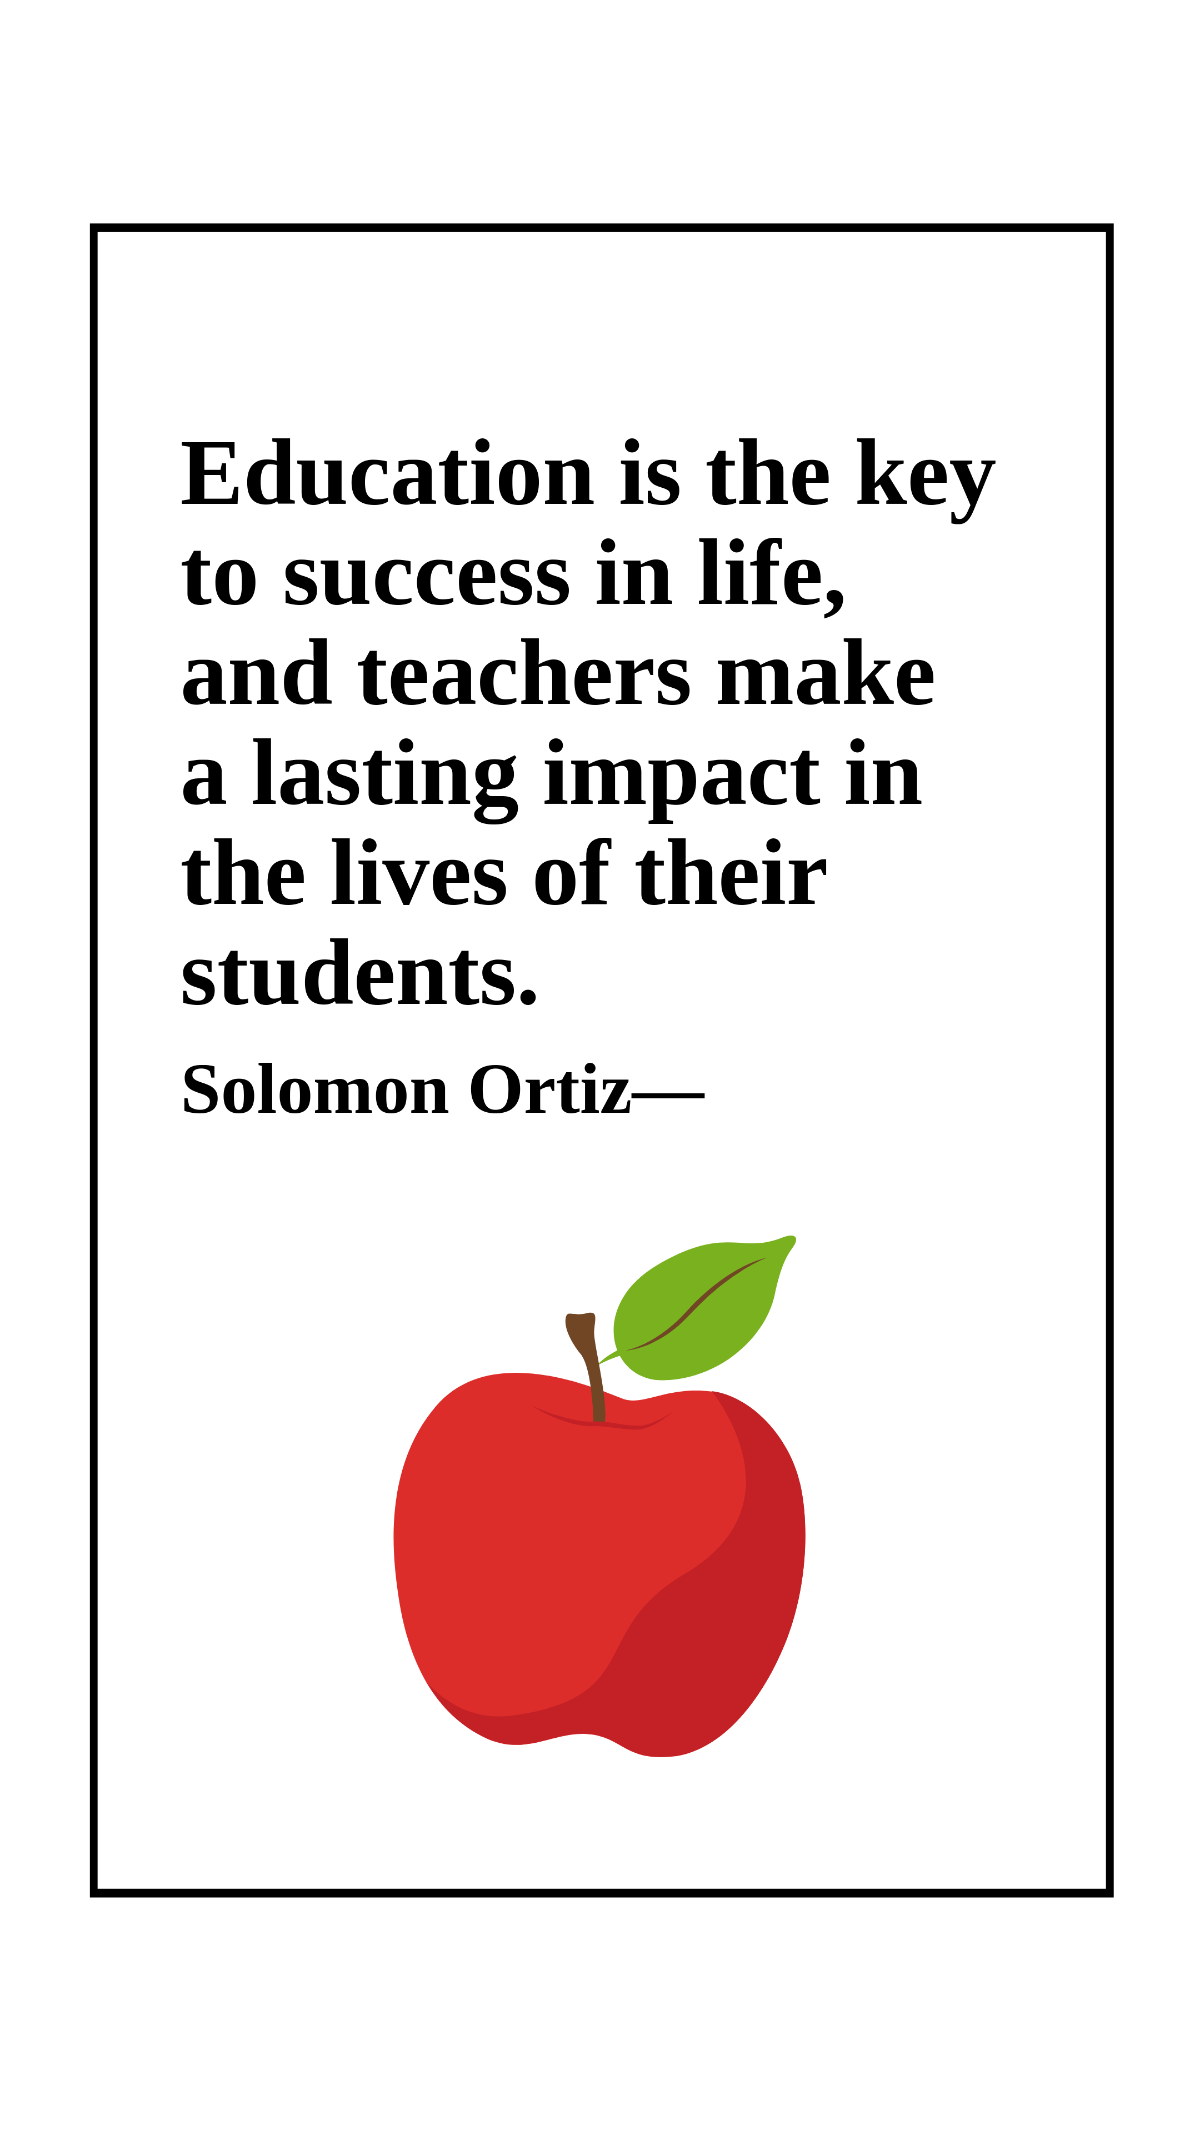 Solomon Ortiz - Education is the key to success in life, and teachers make a lasting impact in the lives of their students.